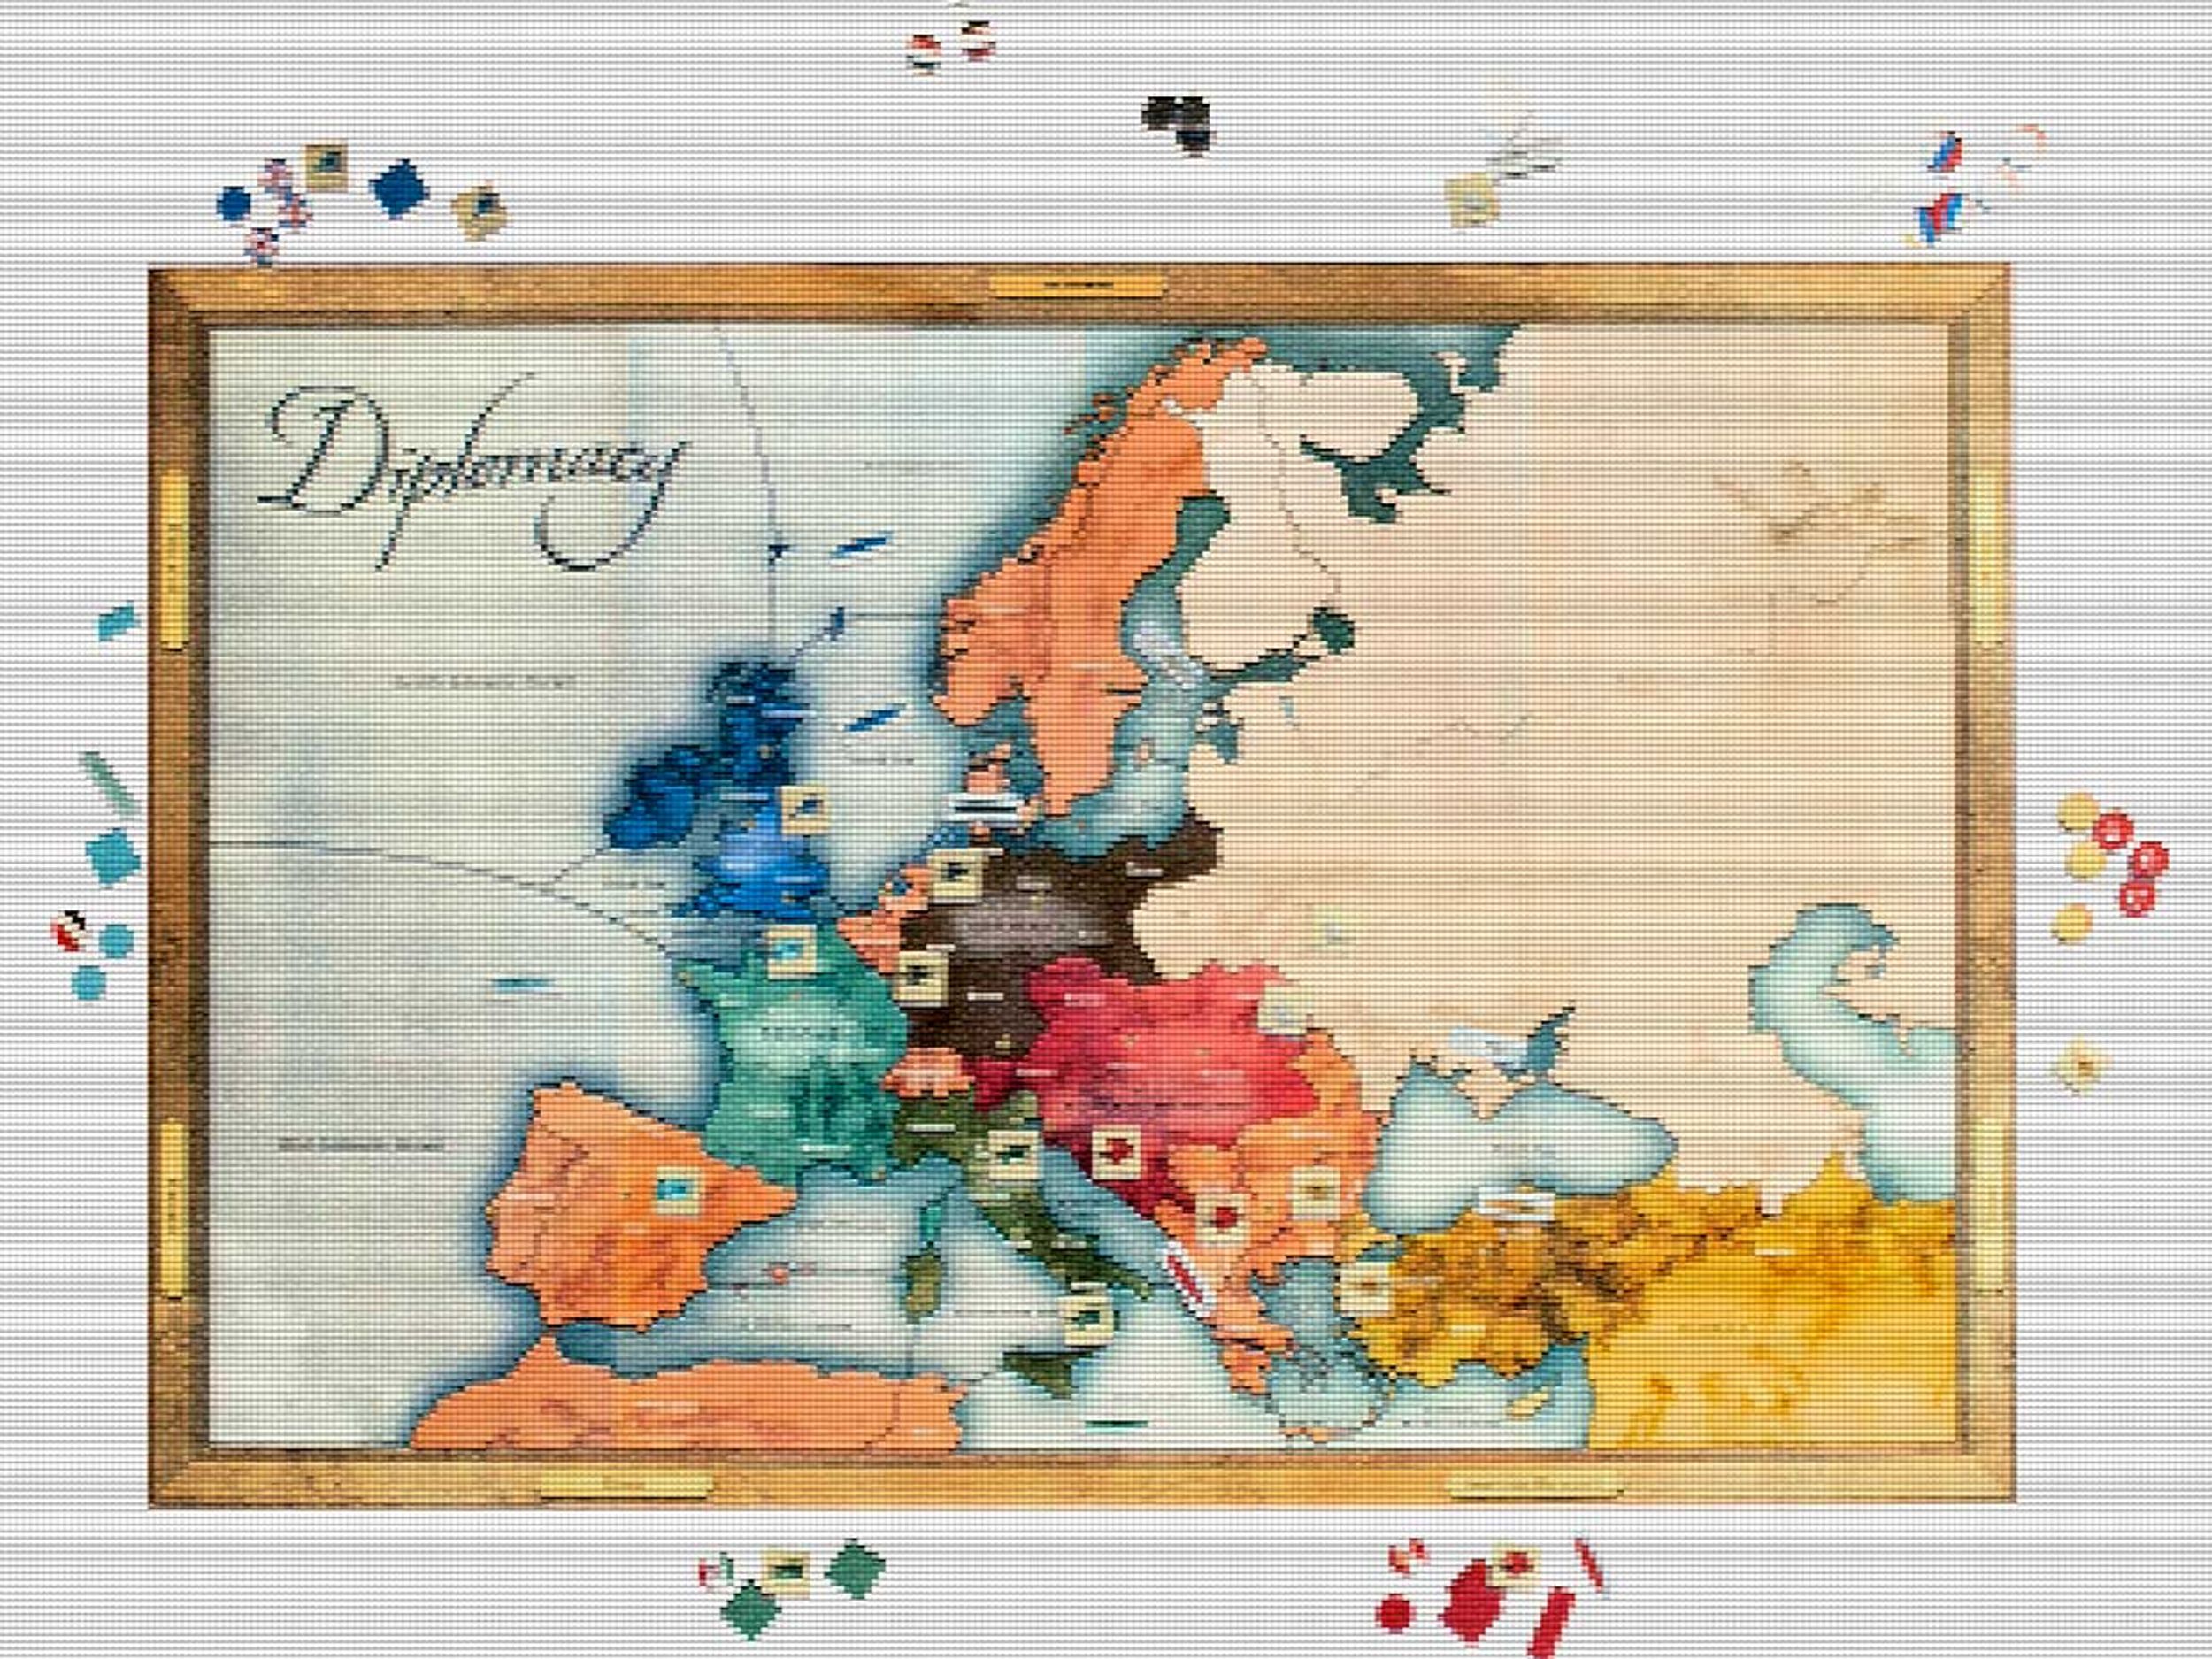 The game Diplomacy, with a pixellation treatment